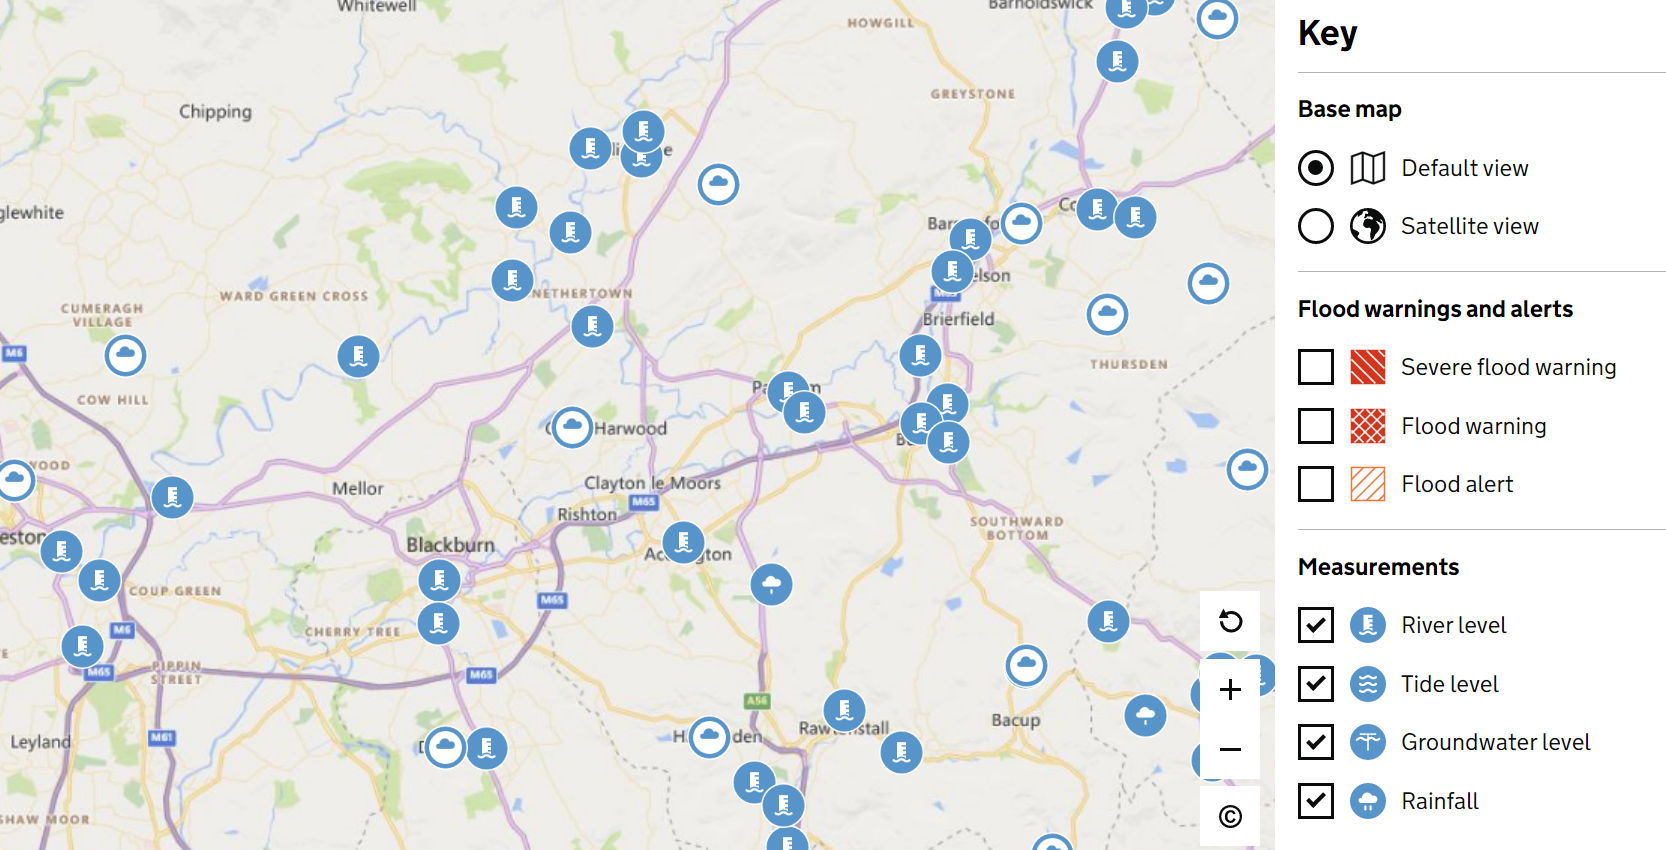 Environment Agency live Flood Map which can be viewed via their 'Check for Flooding' service.